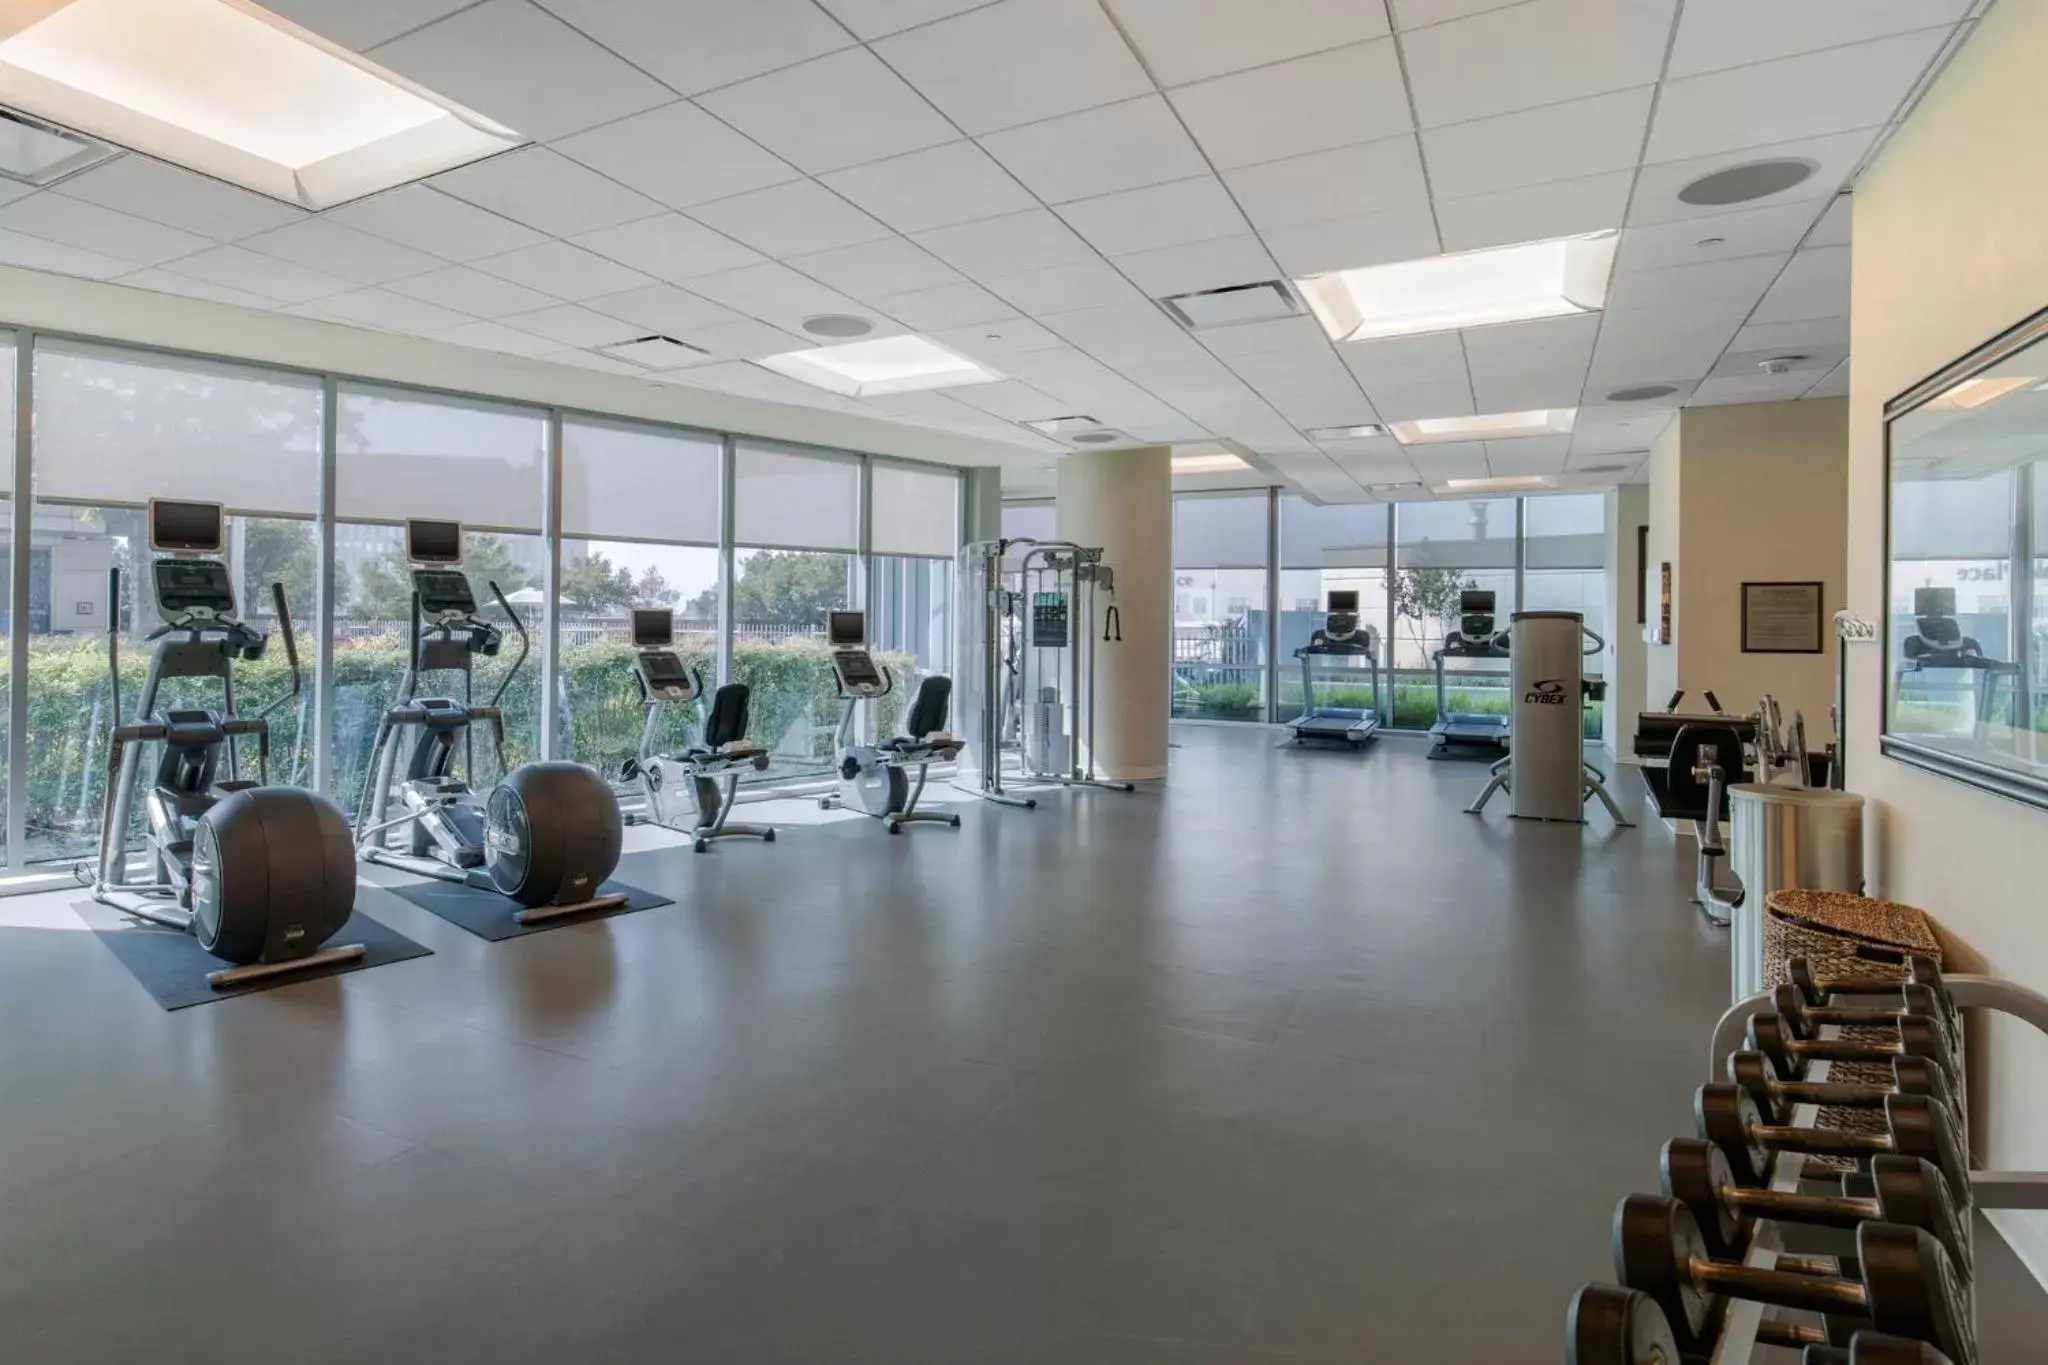 Fitness centre/facilities, Fitness Center/Facilities in Omni Fort Worth Hotel